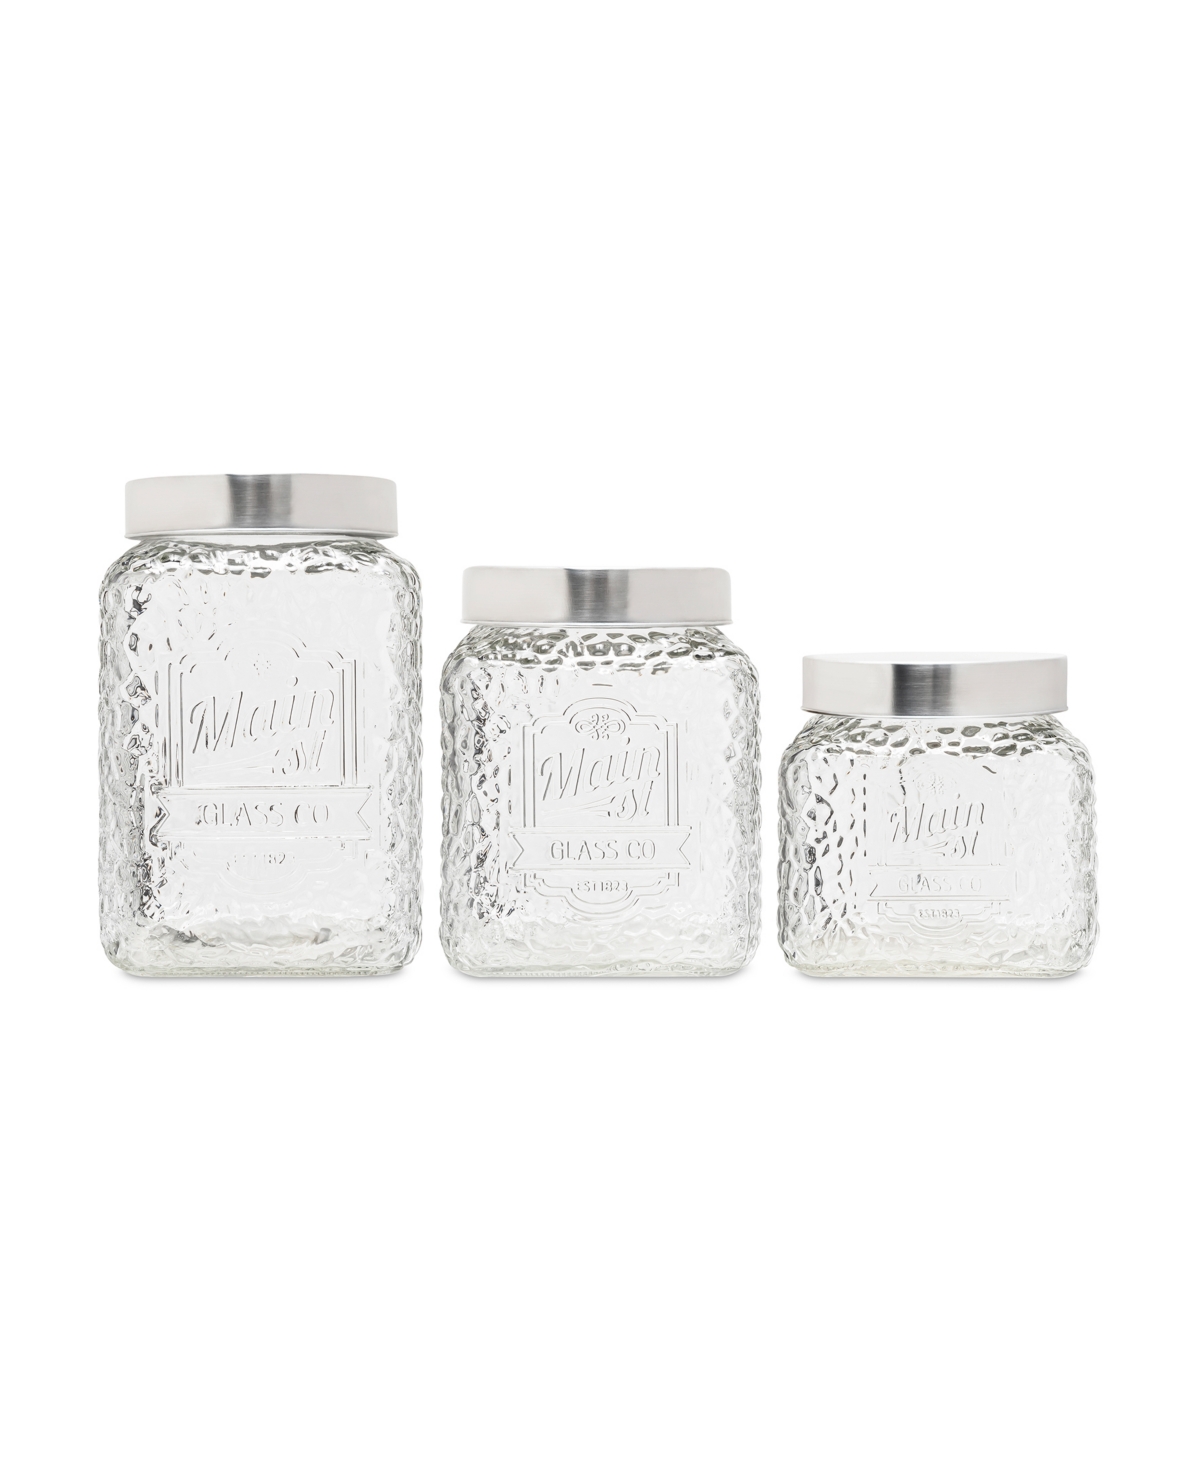 American Atelier La Maison Hammered Glass Canisters Set, 3 Piece In Clear